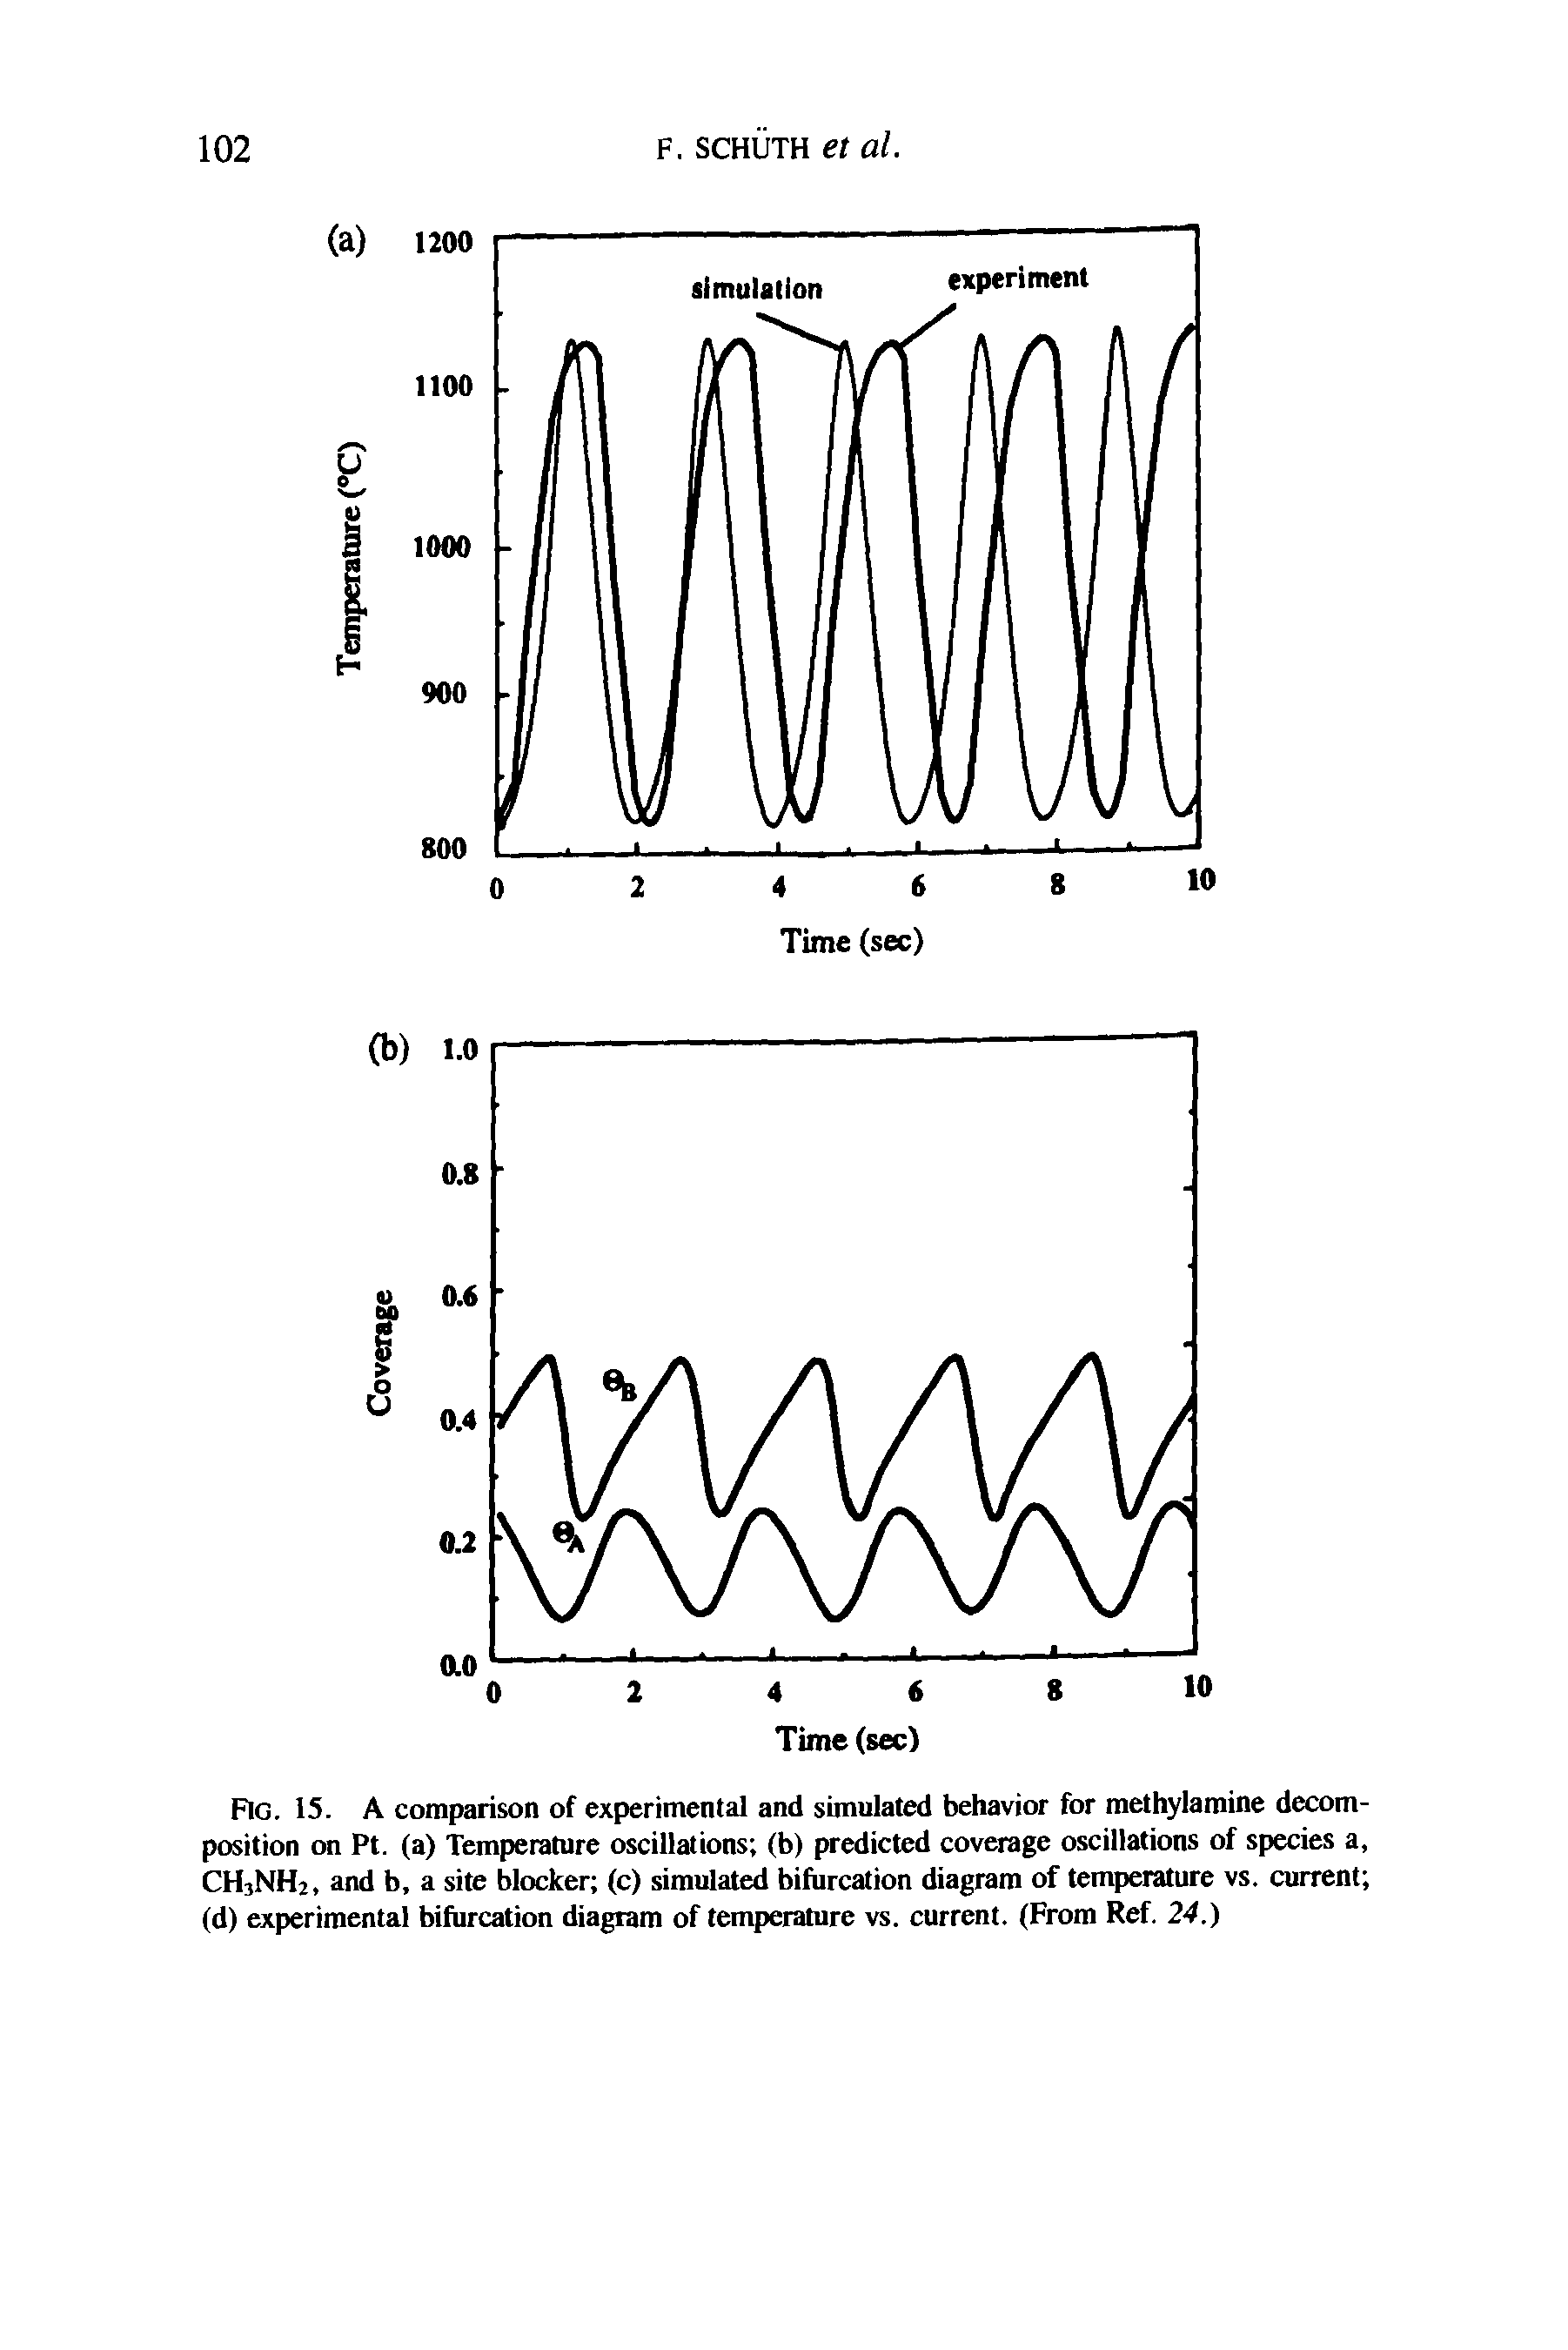 Fig. 15. A comparison of experimental and simulated behavior for methylamine decomposition on Pt. (a) Temperature oscillations (b) predicted coverage oscillations of species a, CH3NH2, and b, a site blocker (c) simulated bifurcation diagram of temperature vs. current (d) experimental bifurcation diagram of temperature vs. current. (From Ref. 24.)...